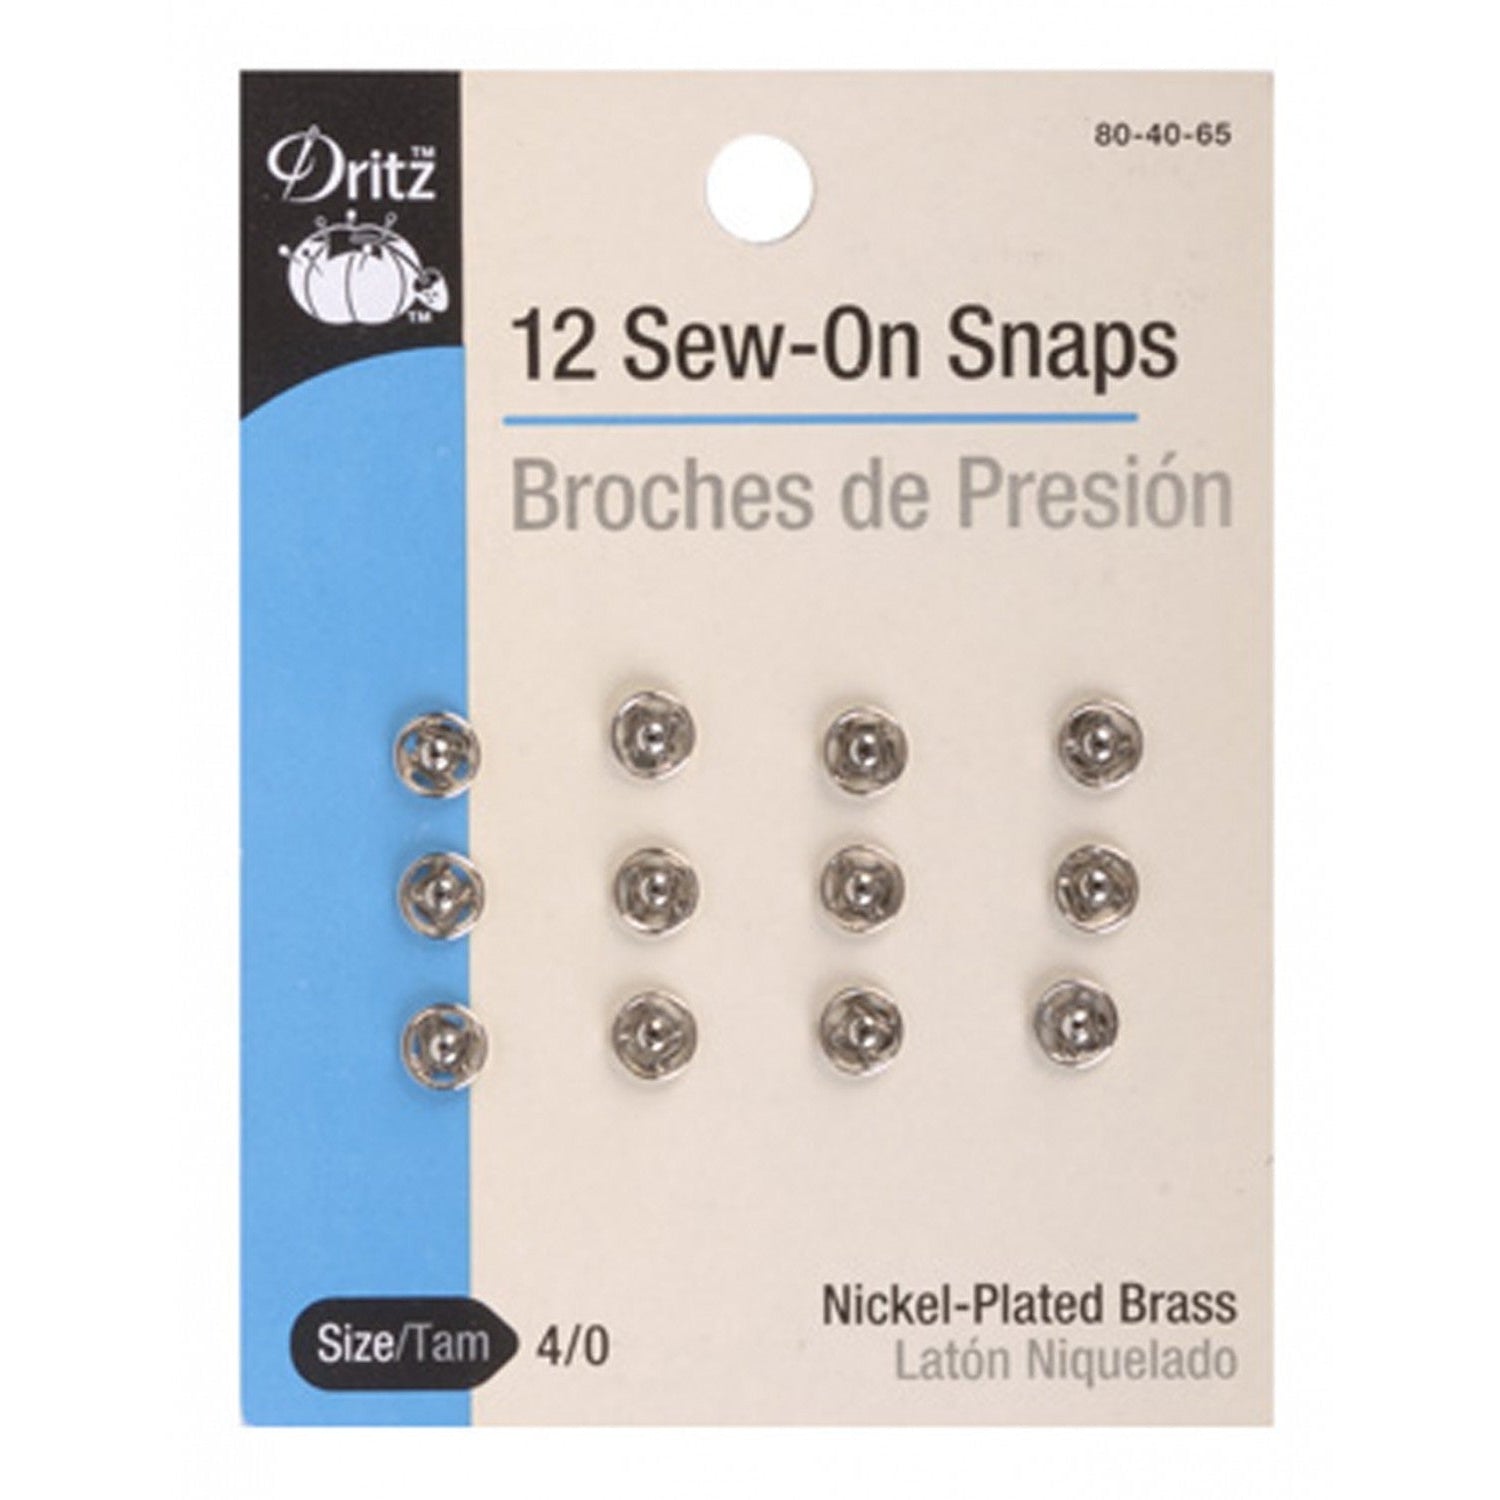 12 Sew-On Snaps Size 4/0-Notion-Spool of Thread